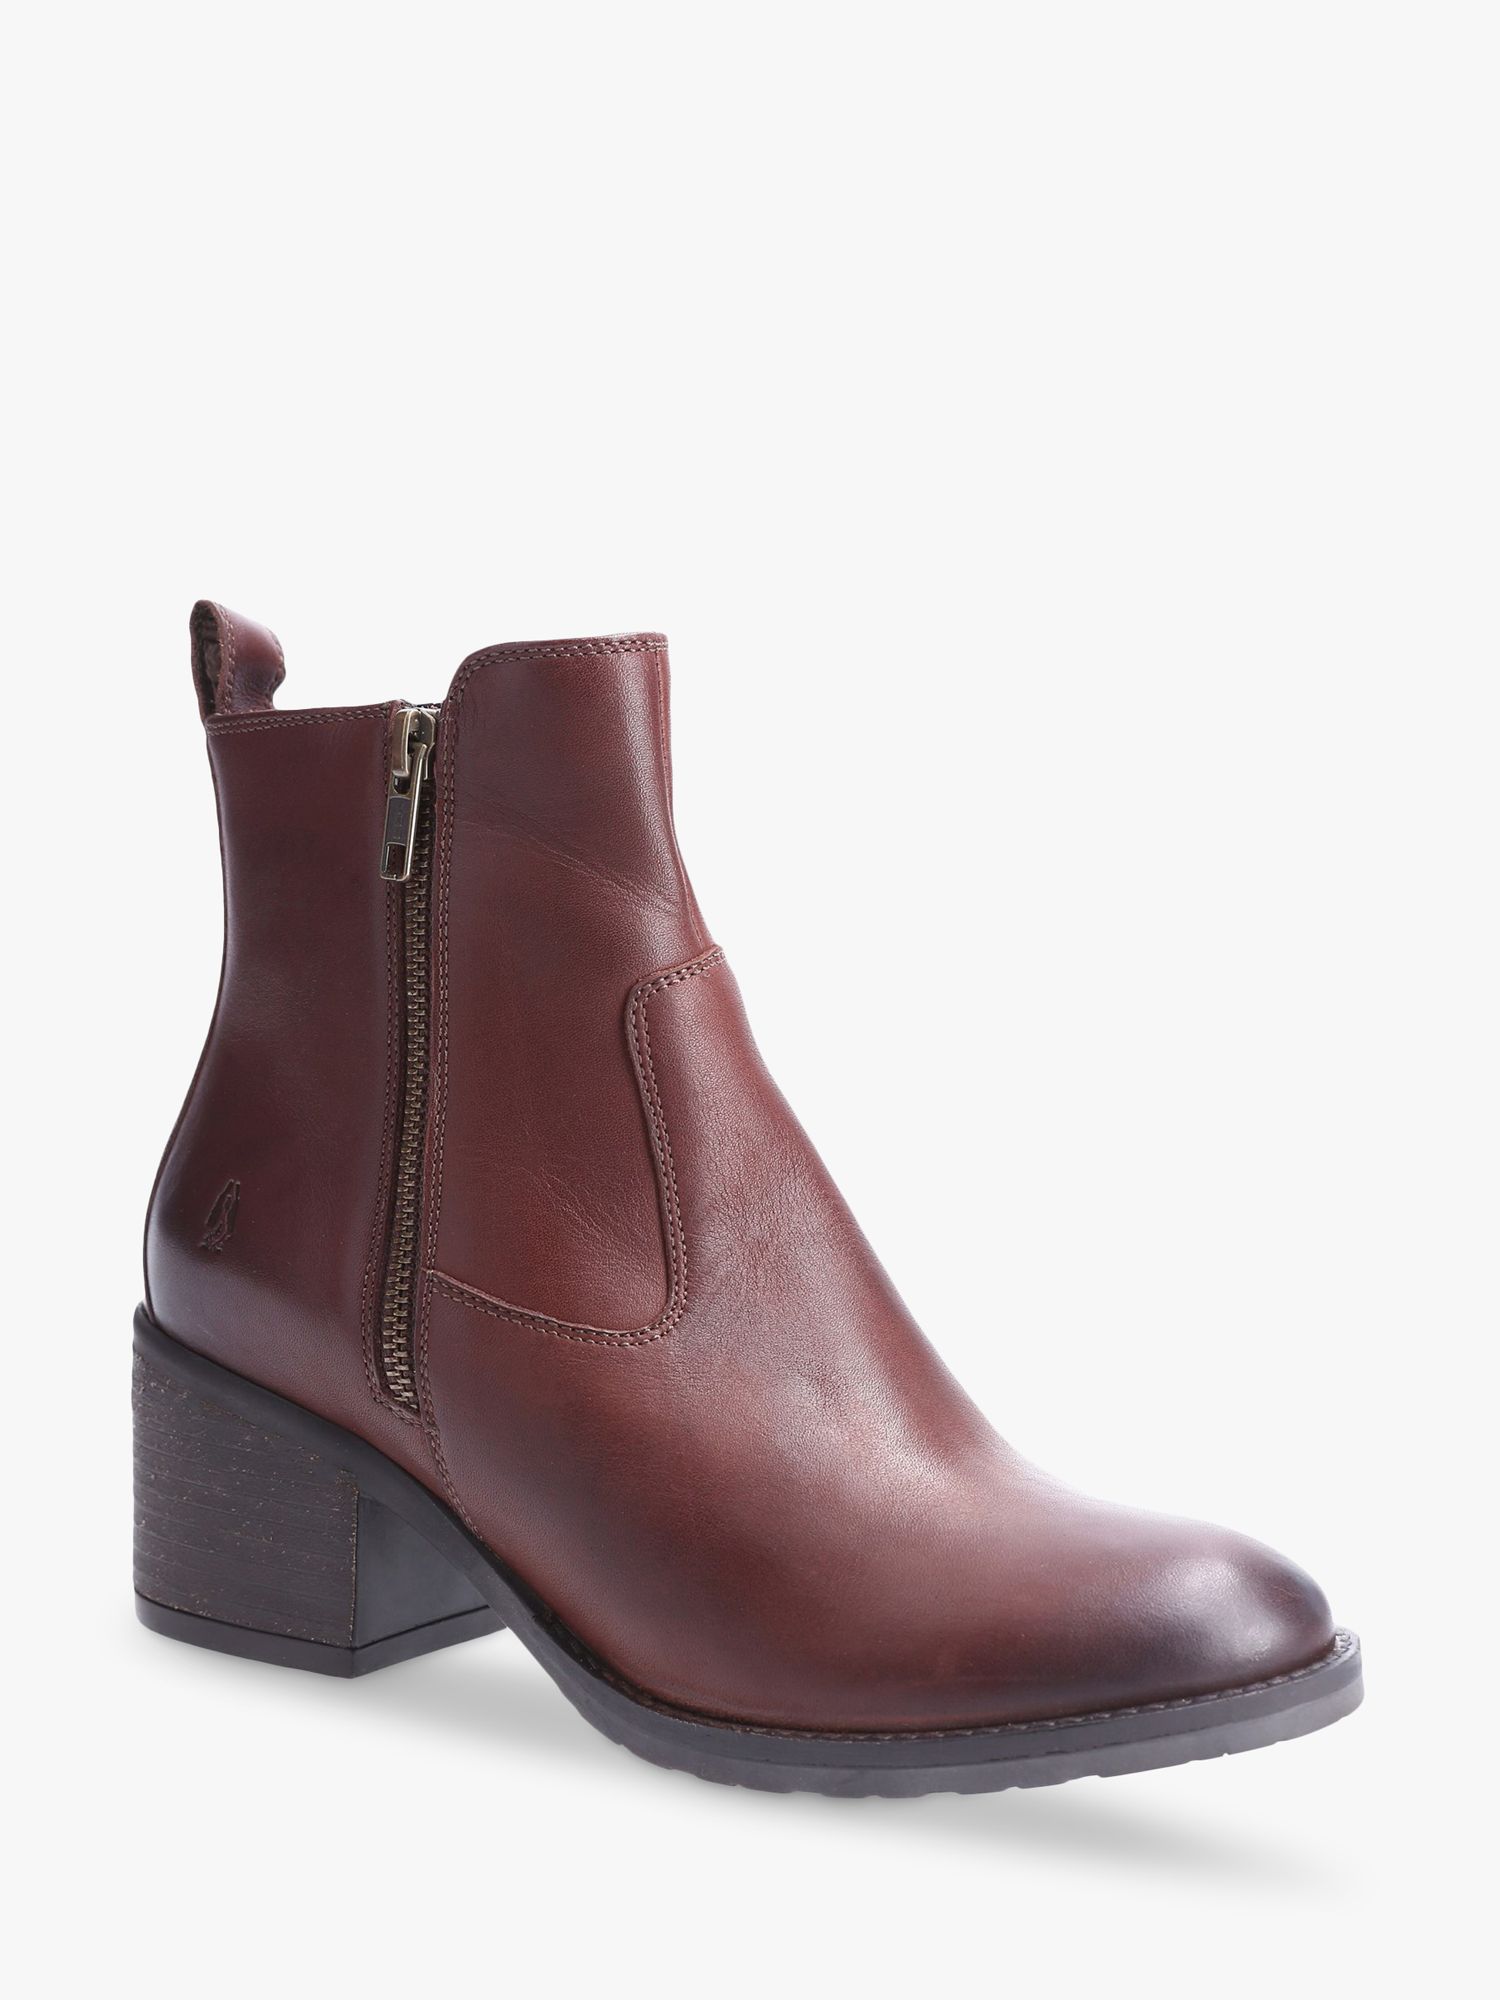 Hush Puppies Helena Leather Block Heel Ankle Boots, Brown at John Lewis ...